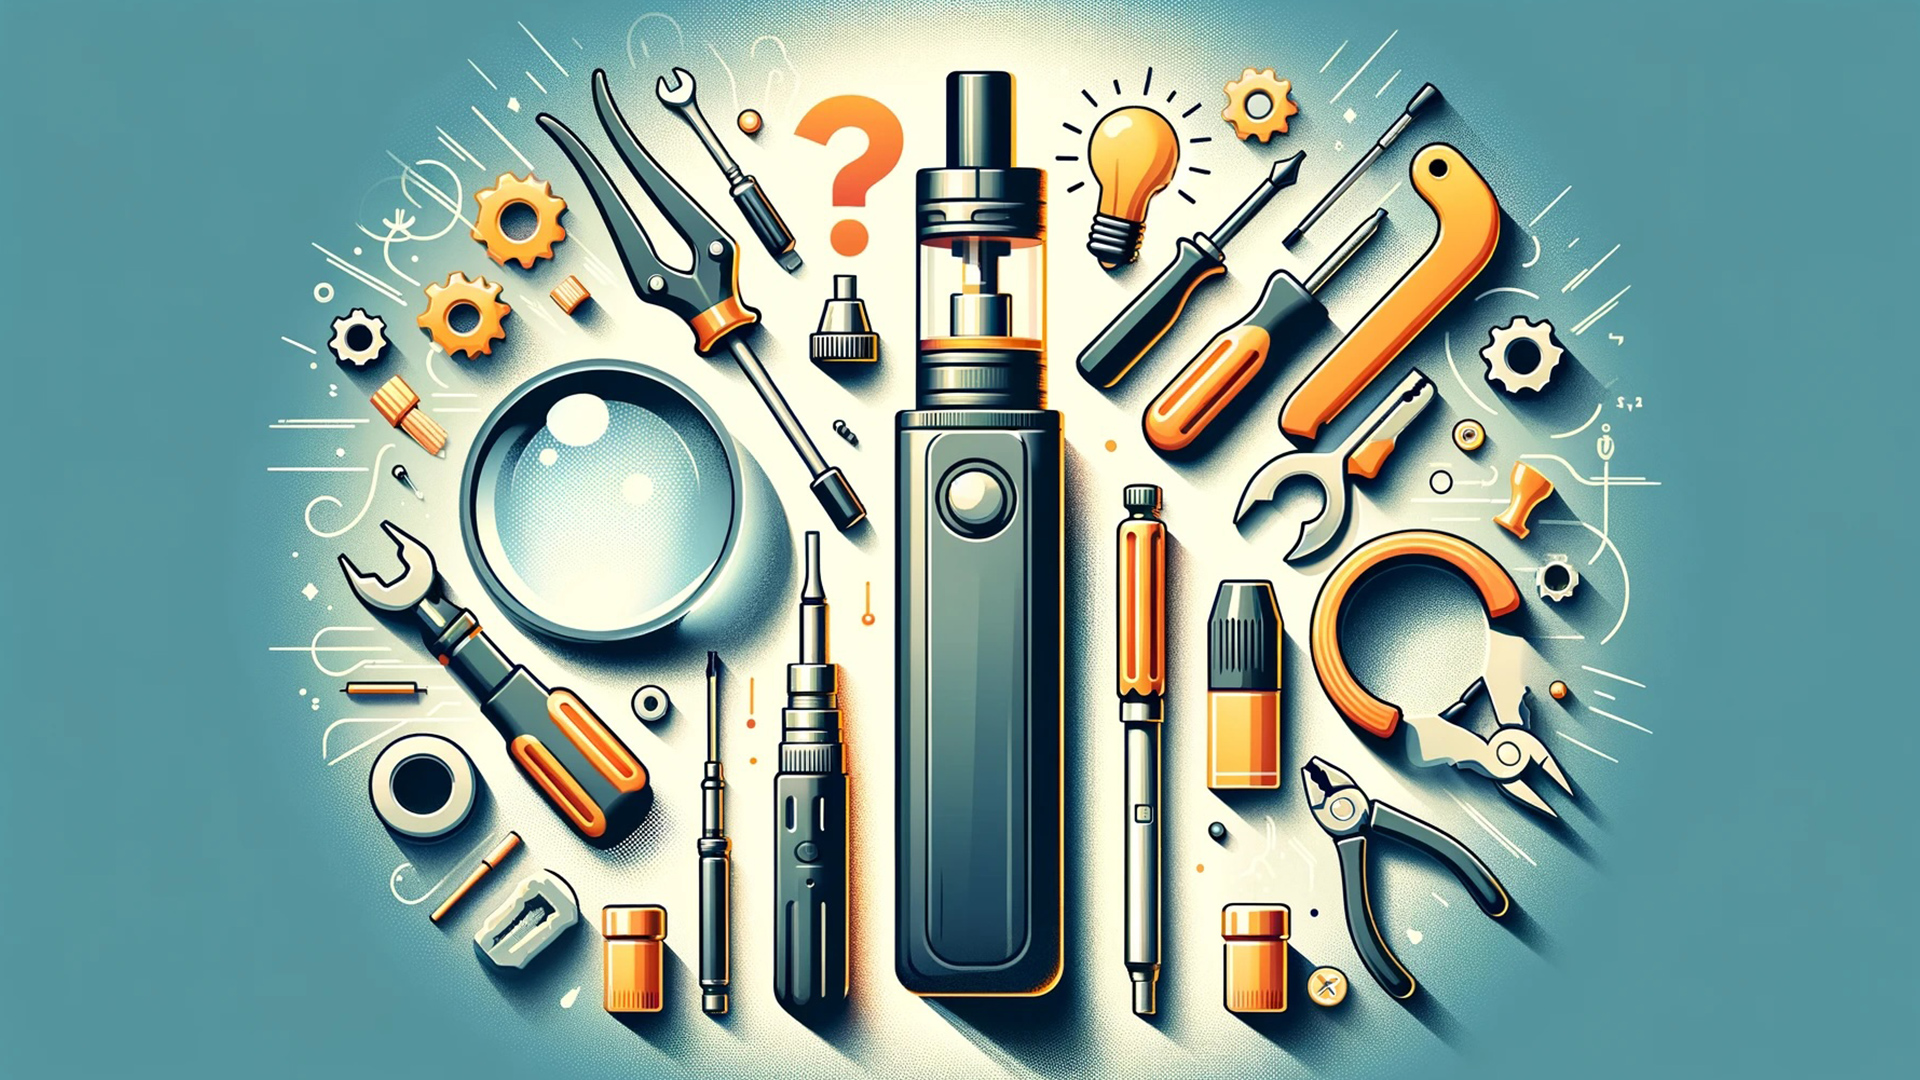 Vape pen with repair tools, magnifying glass, question mark, and light bulb symbolizing troubleshooting solutions